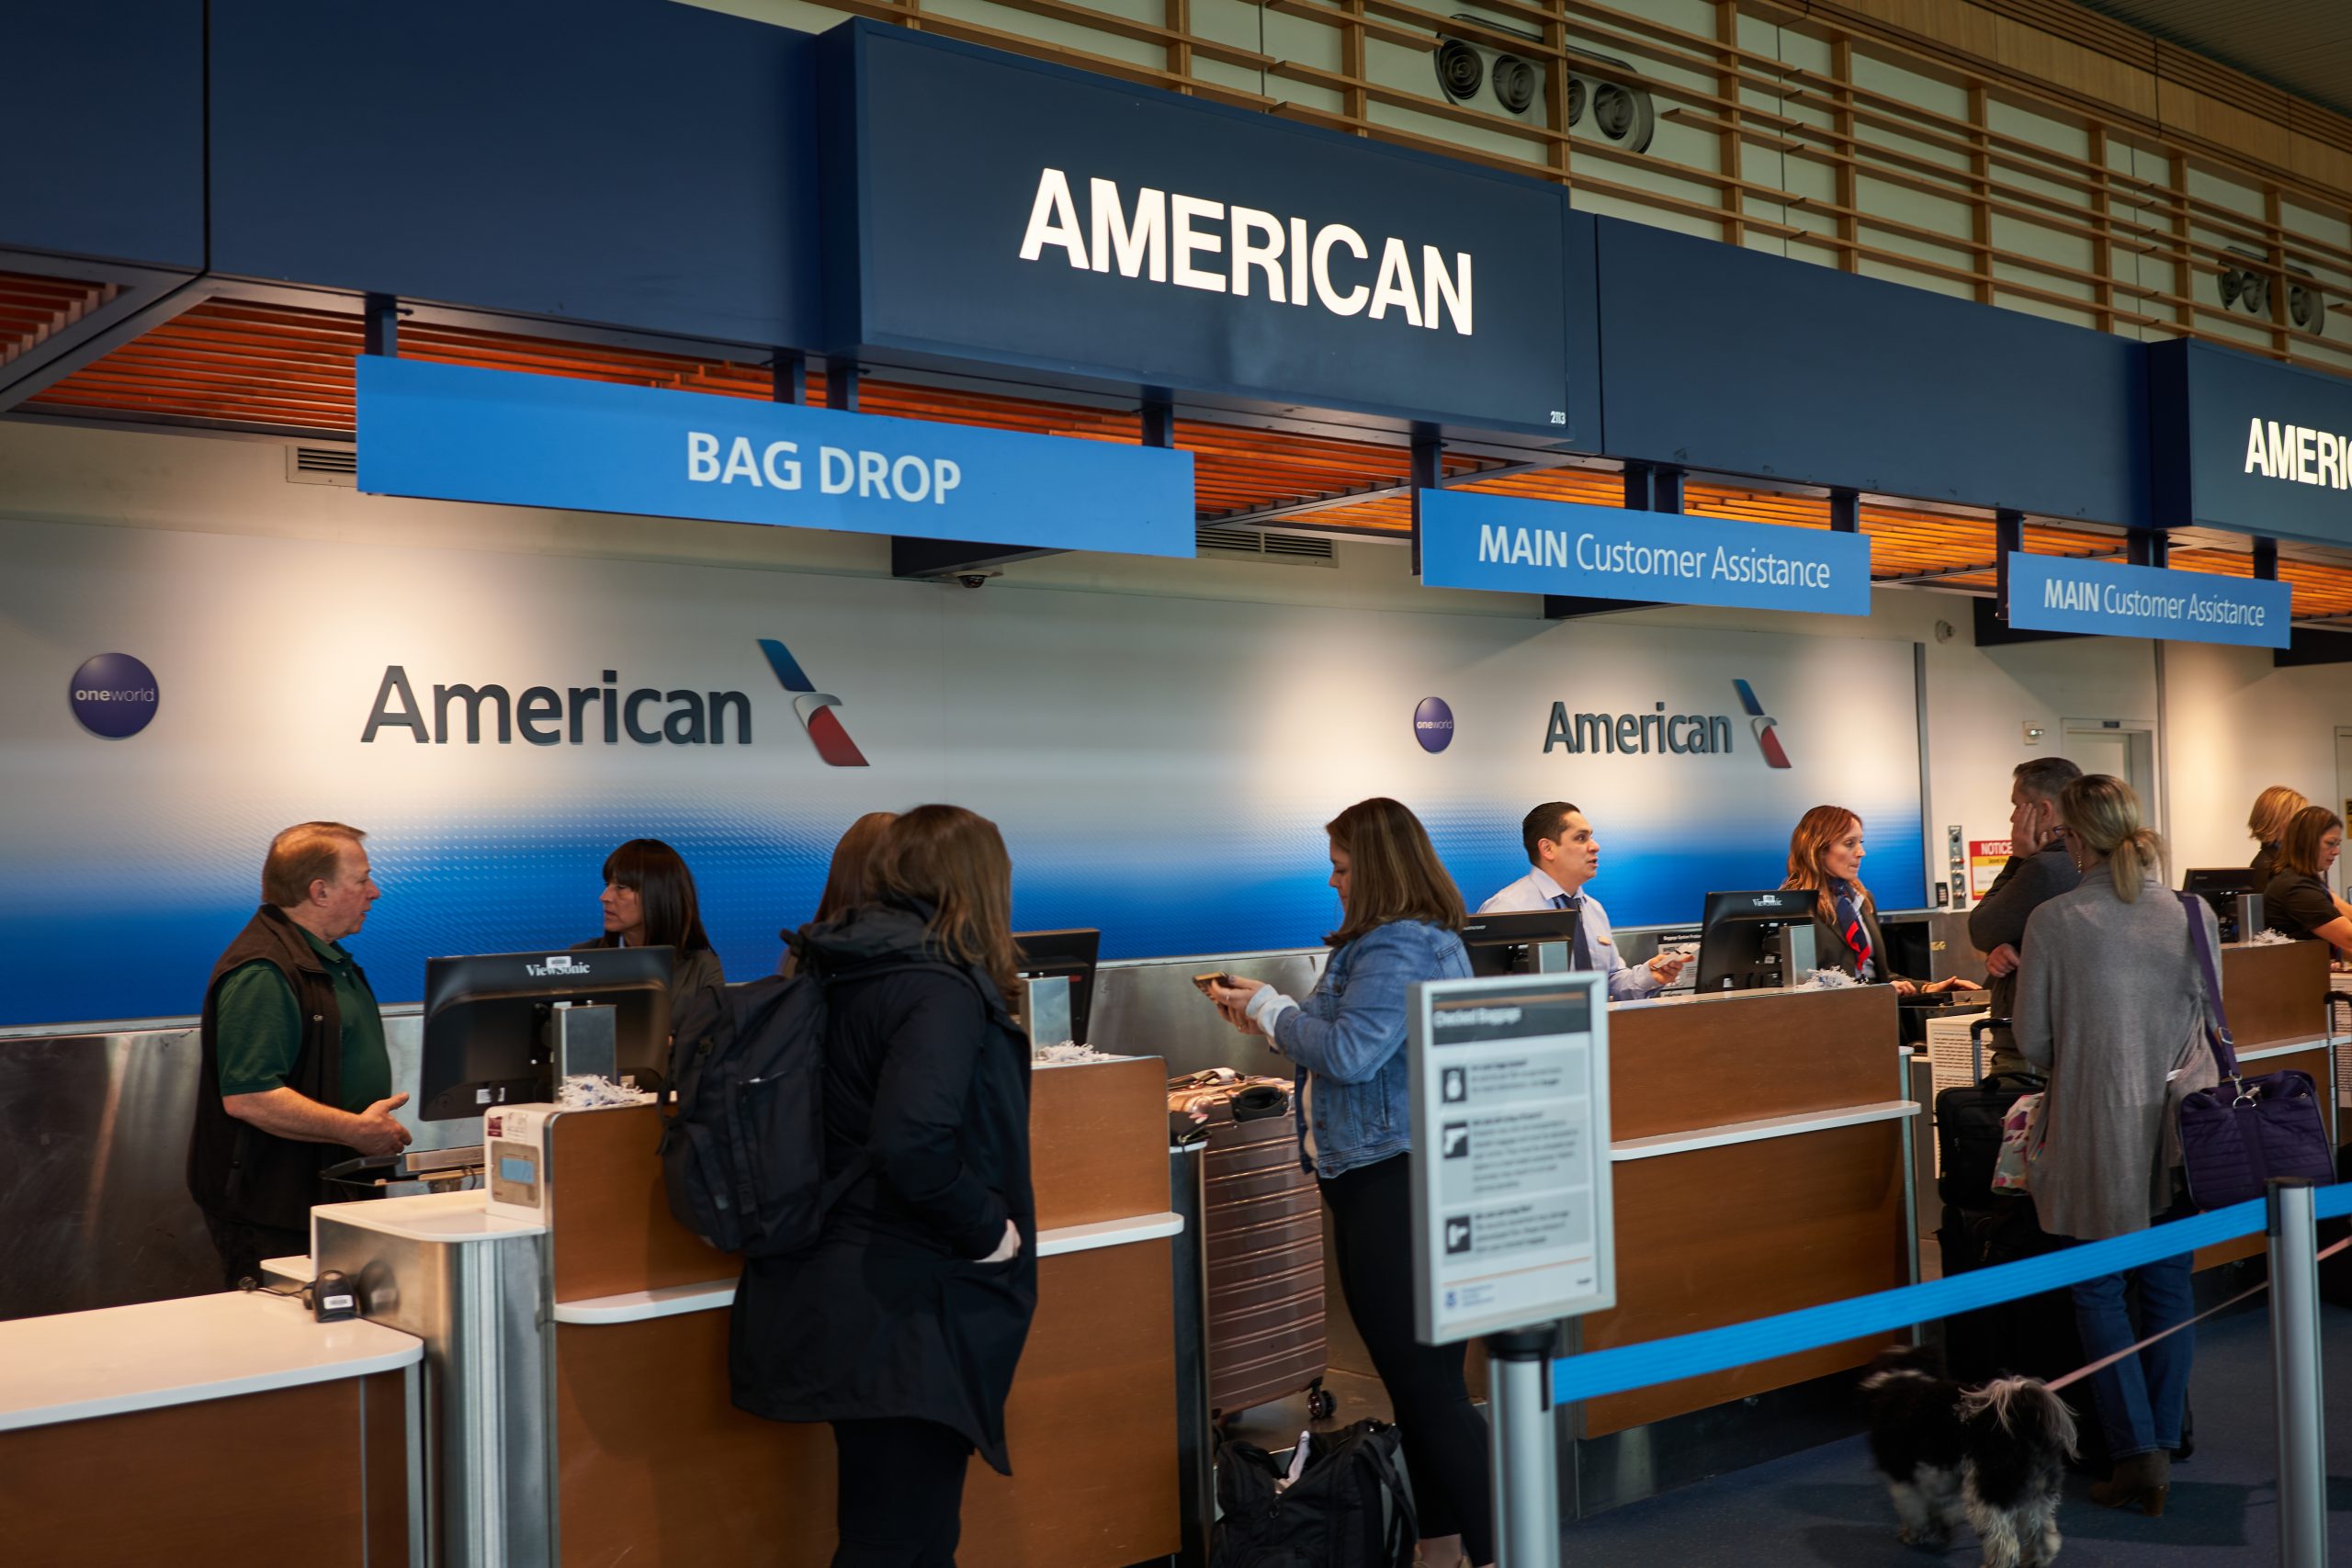 AAdvantage Executive cardholders get priority check-in and boarding access on American Airlines flights